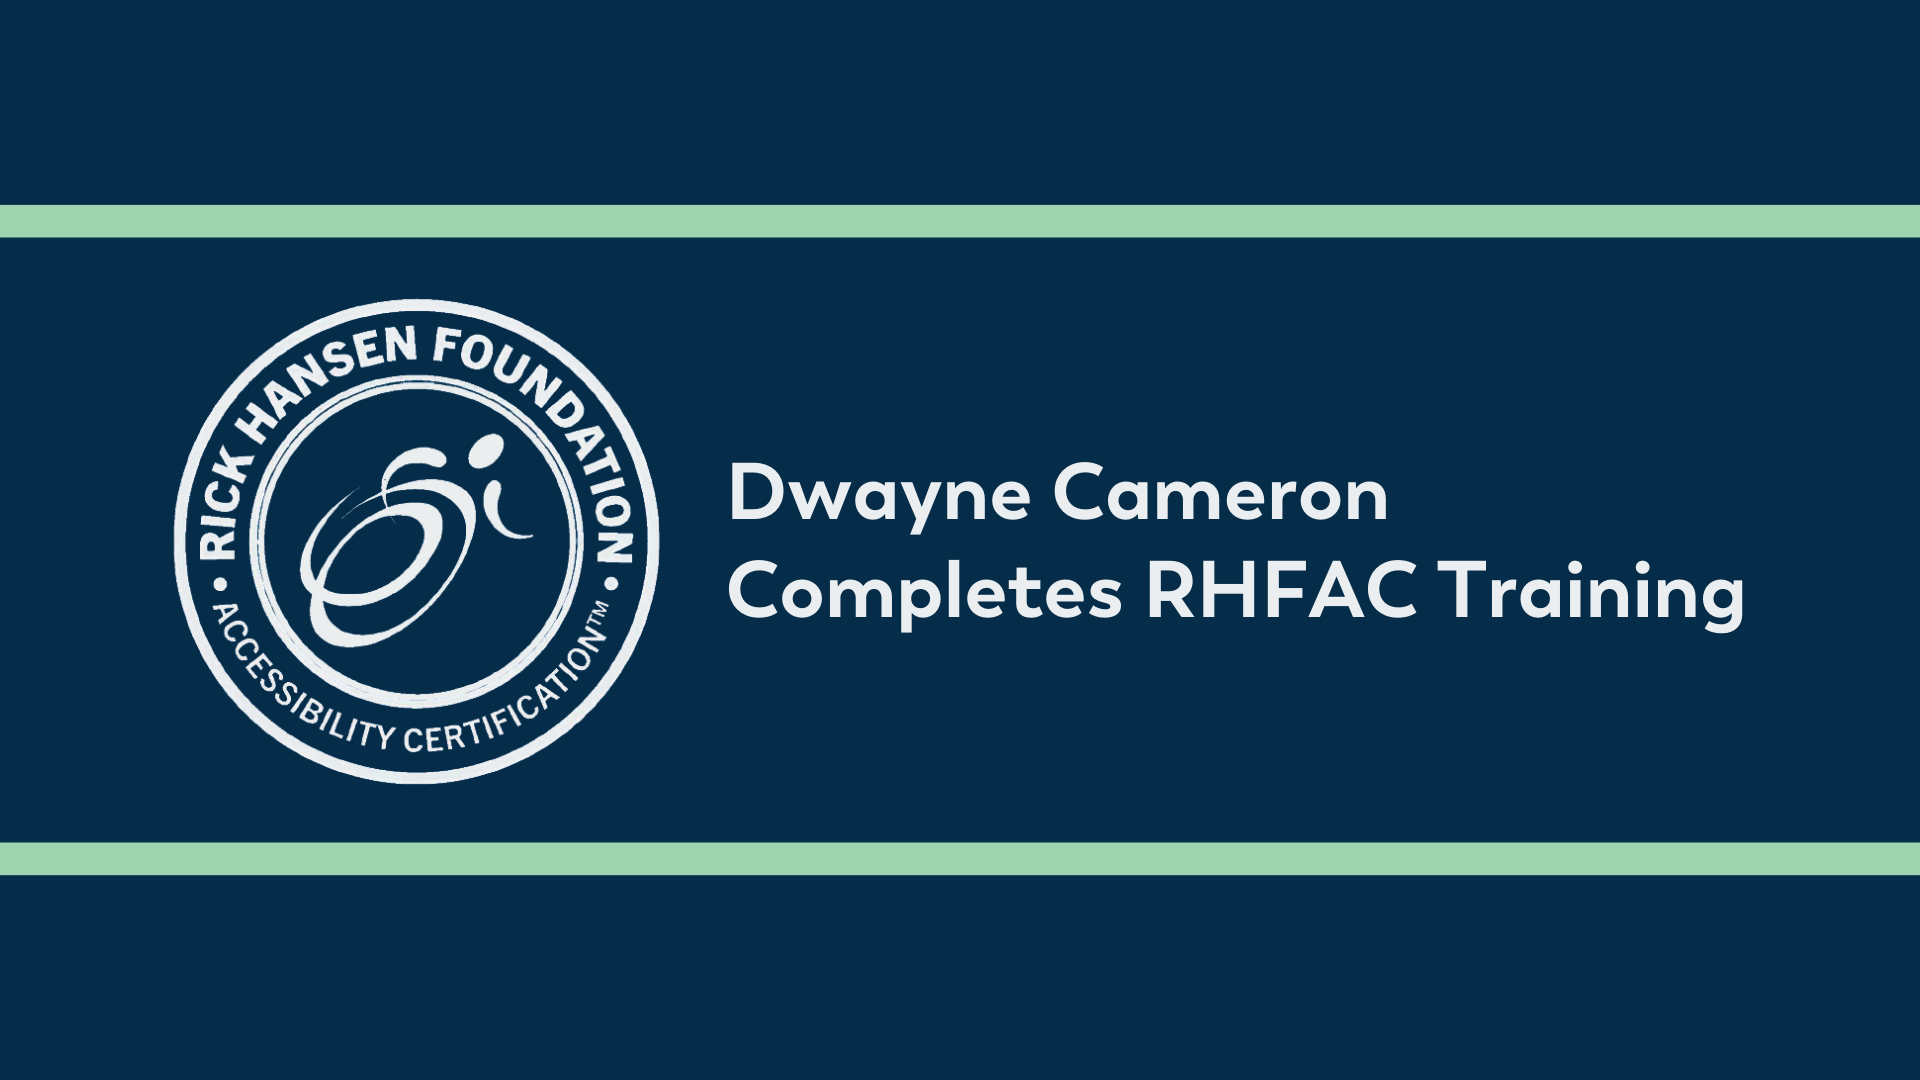 Featured image for “Dwayne Cameron Completes RHFAC Training Program”